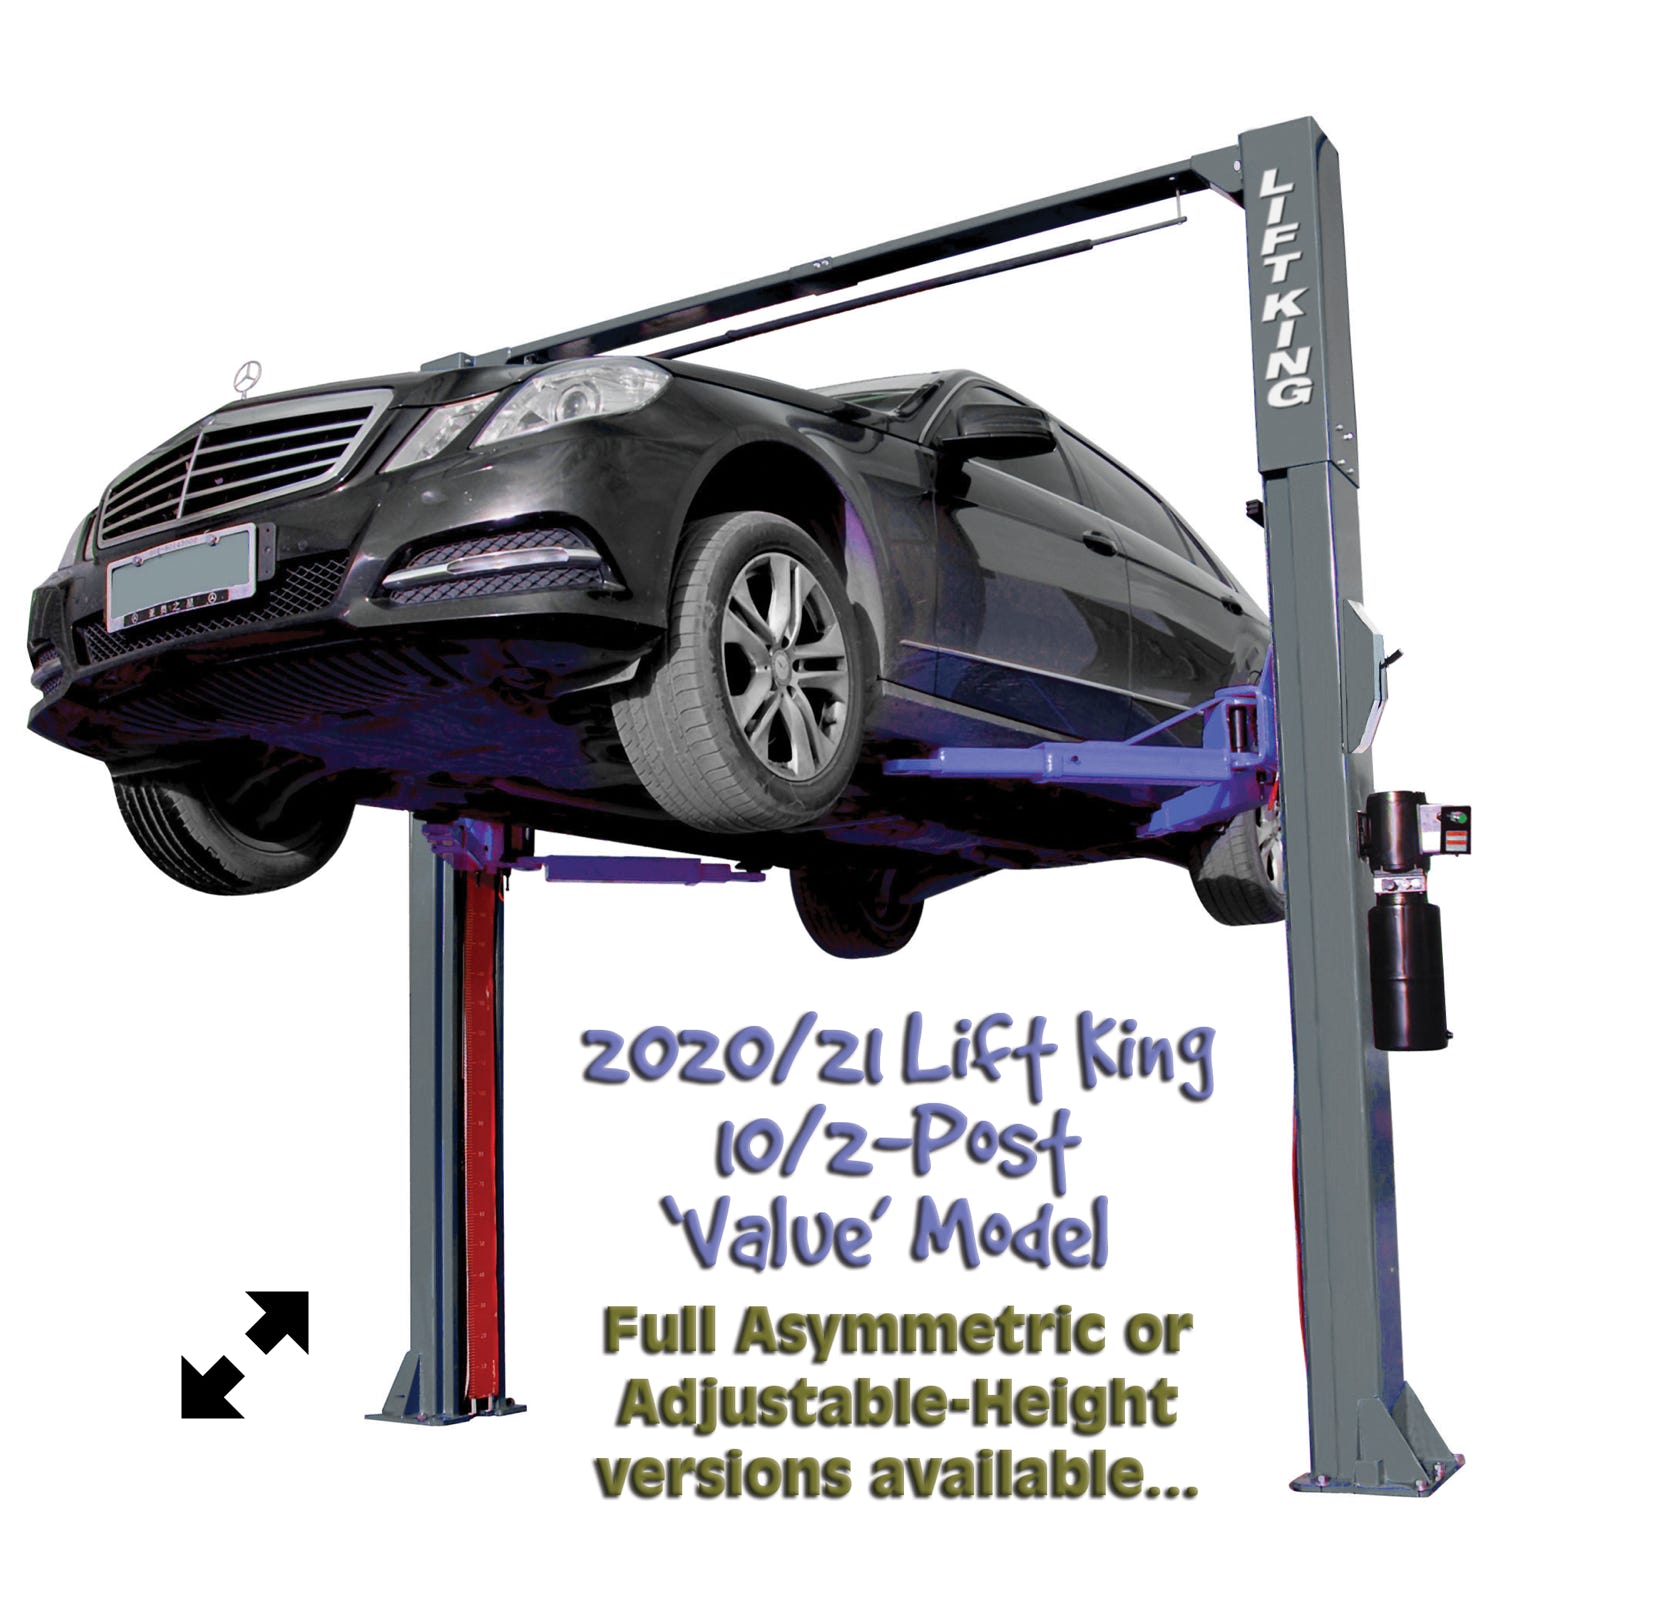 2 Post Car Hoist: Single-Point Manual-Lock Release Standard-sized model - installs into 3.870m height.  New 2018/19 Full Asymmetric Design with Double-S / Manganese Composite Posts.  Australian & Euro Certified  4500kgs Capacity 